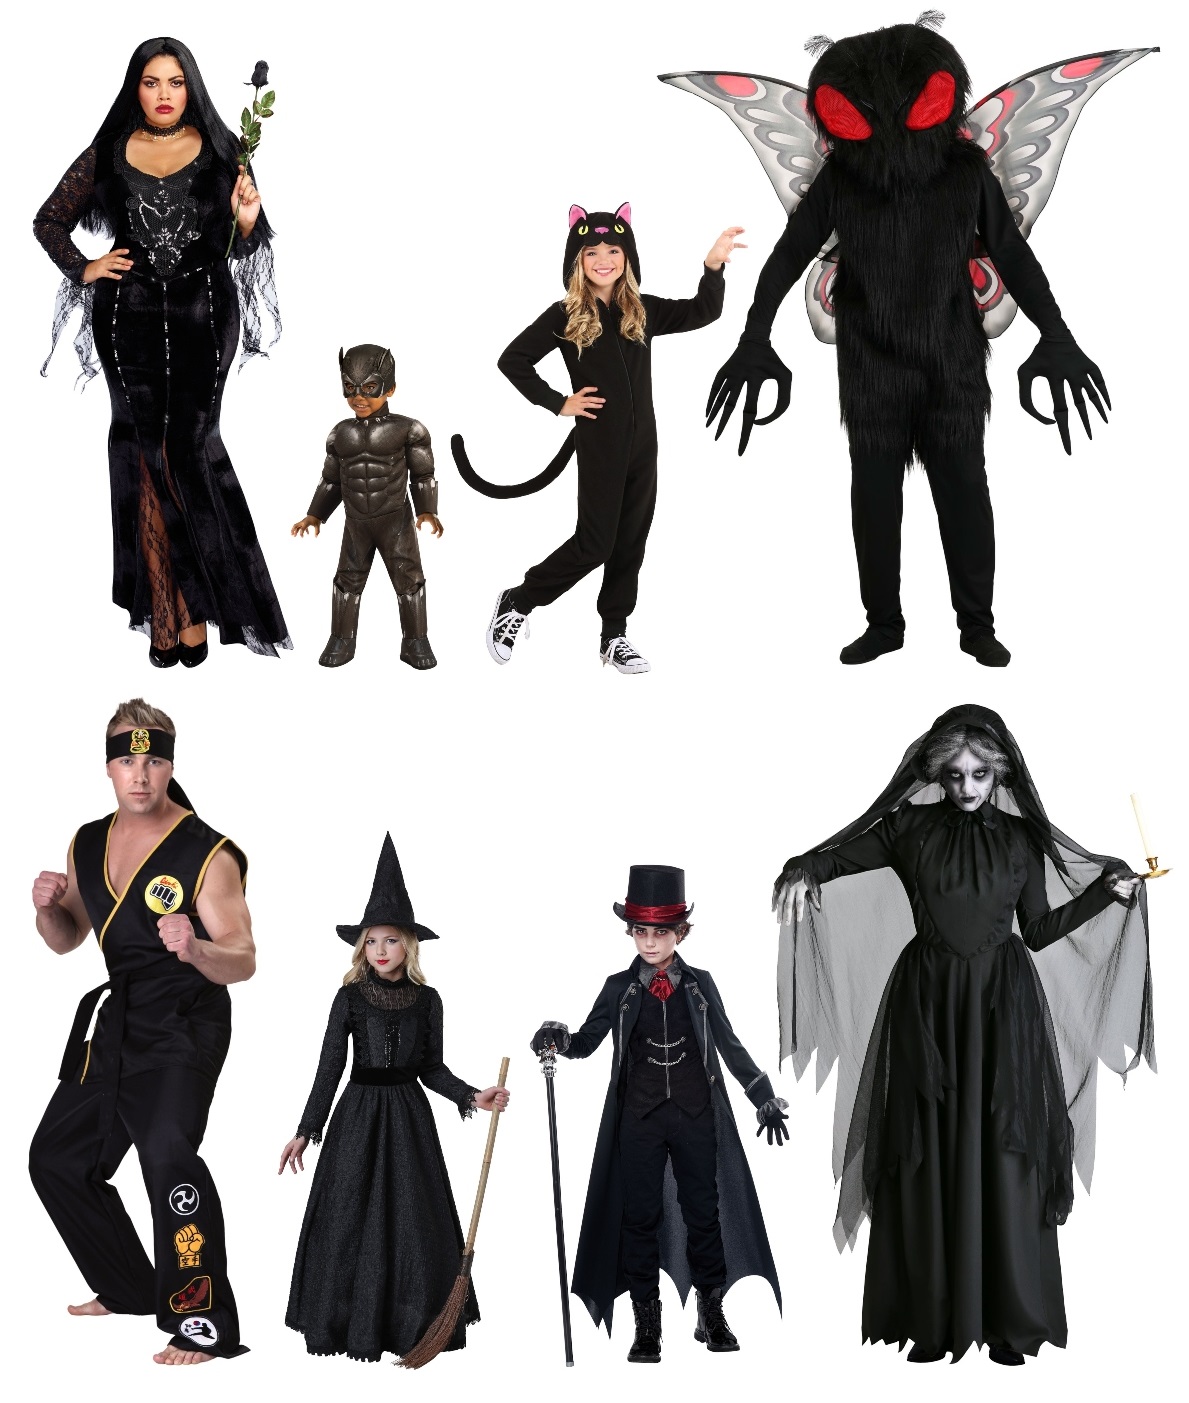 Colorful Costume Ideas for a Spectrum of Fun [Costume Guide] -   Blog